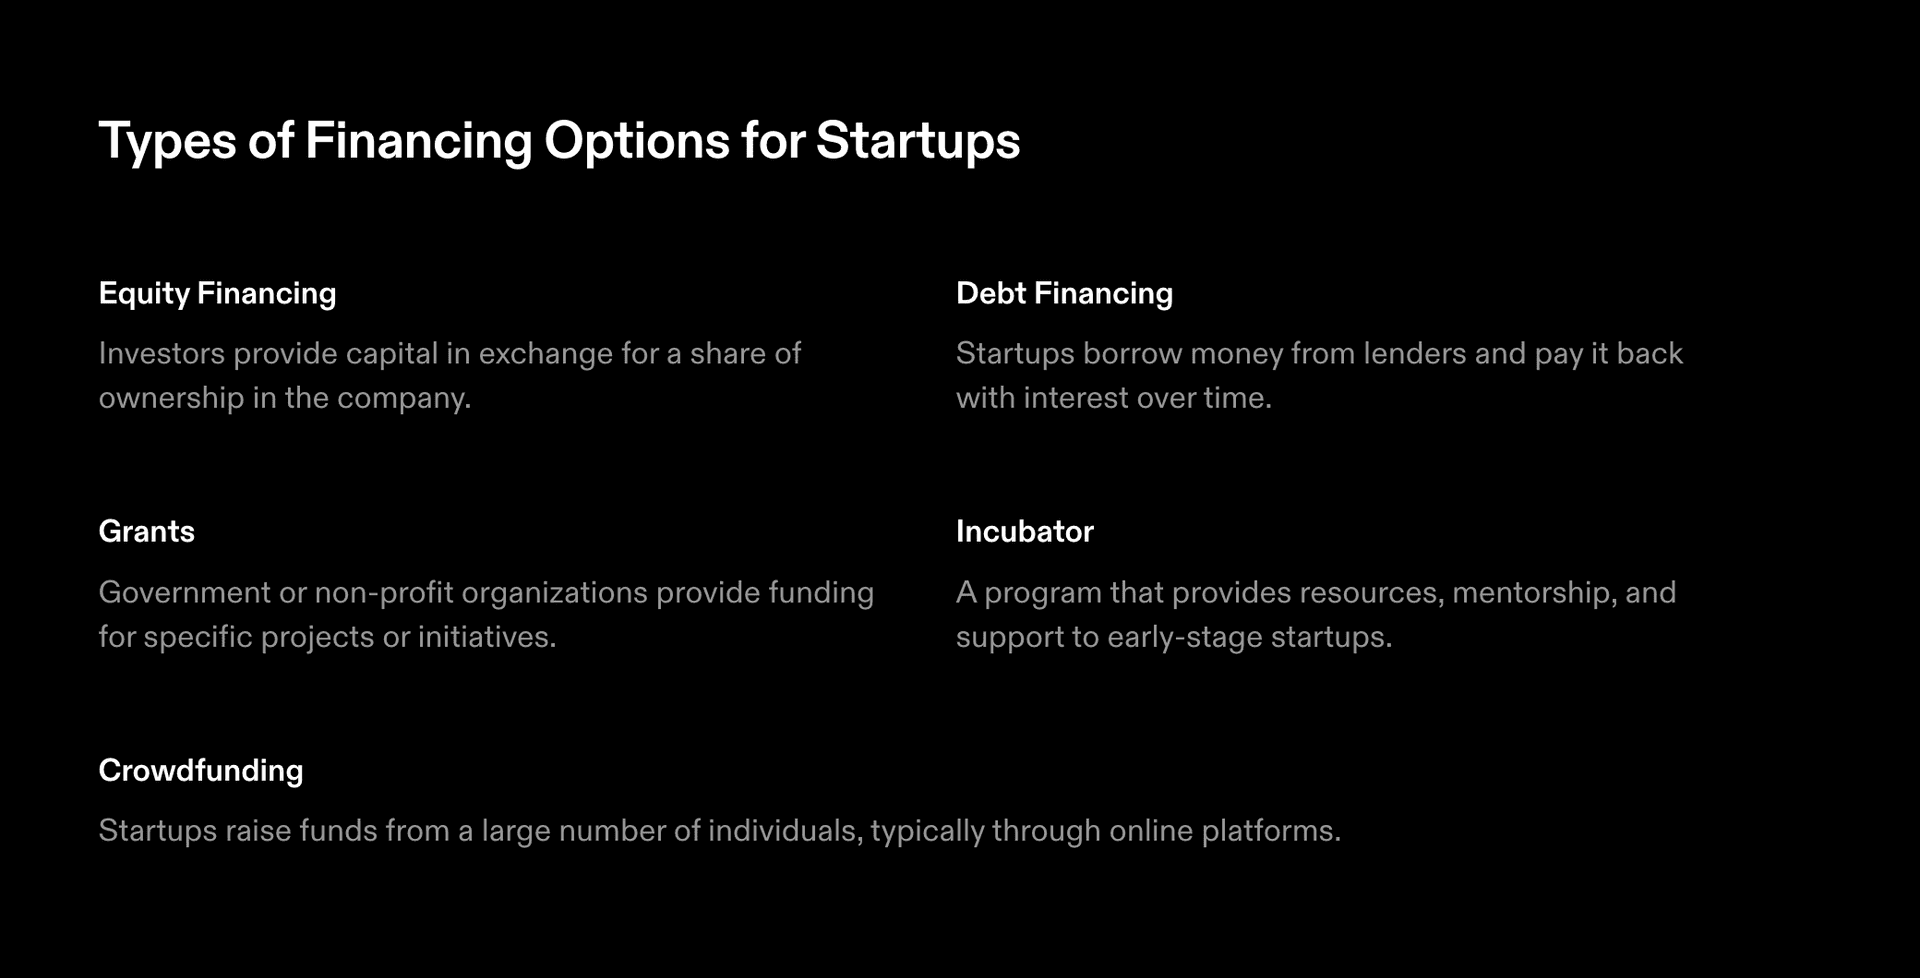 Image about the types of startup financing options